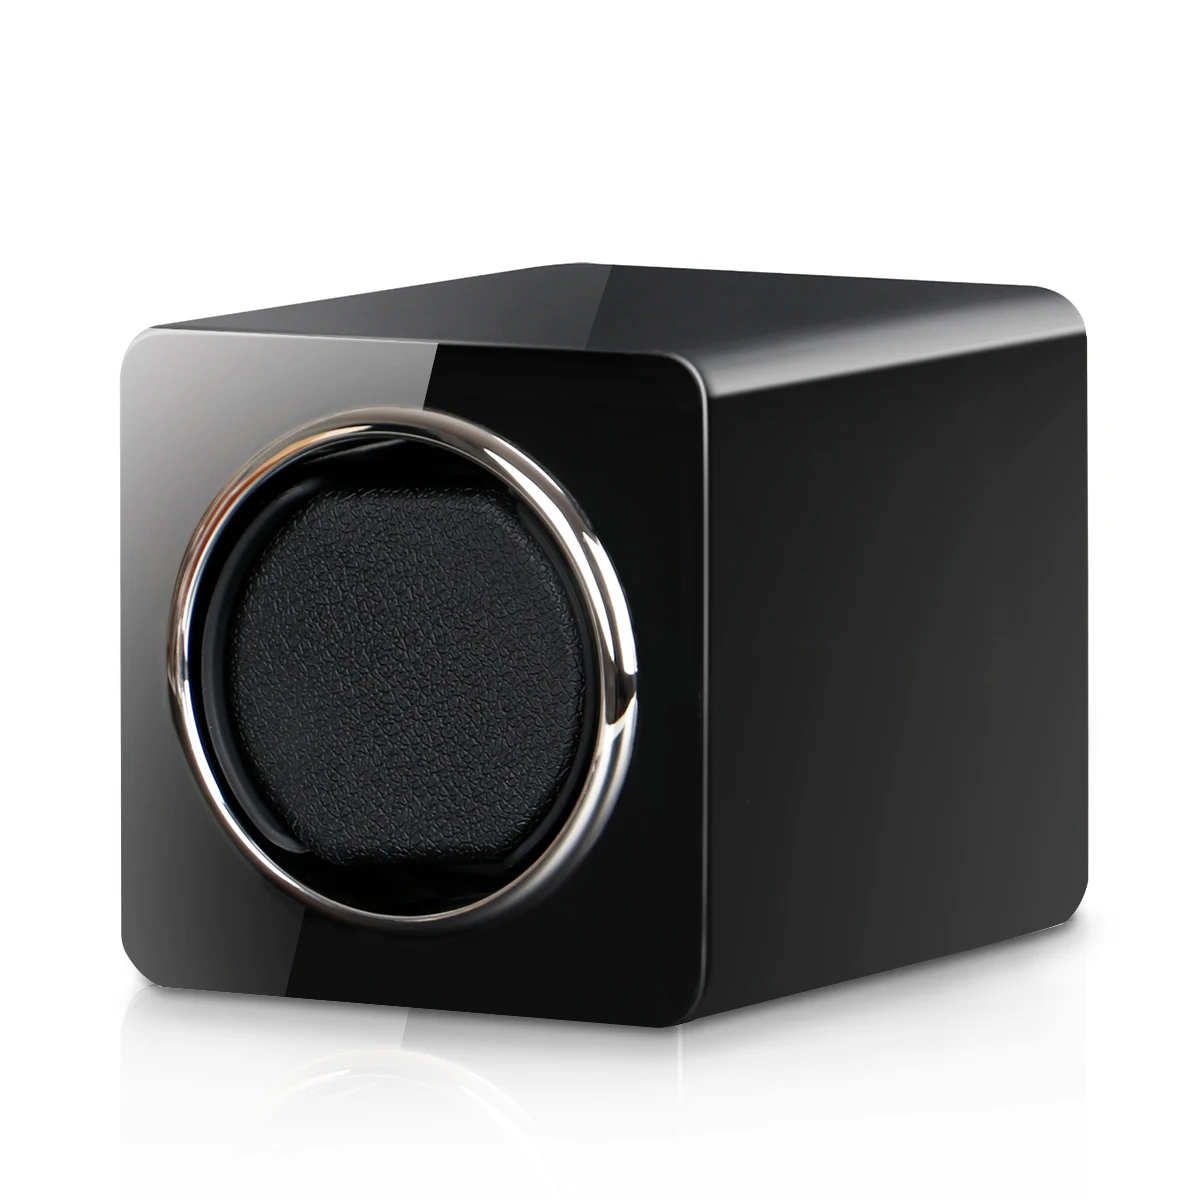 Watch Winder for Automatic Watches Mechanical Rotating Display Box Shaker for Male Female Watch